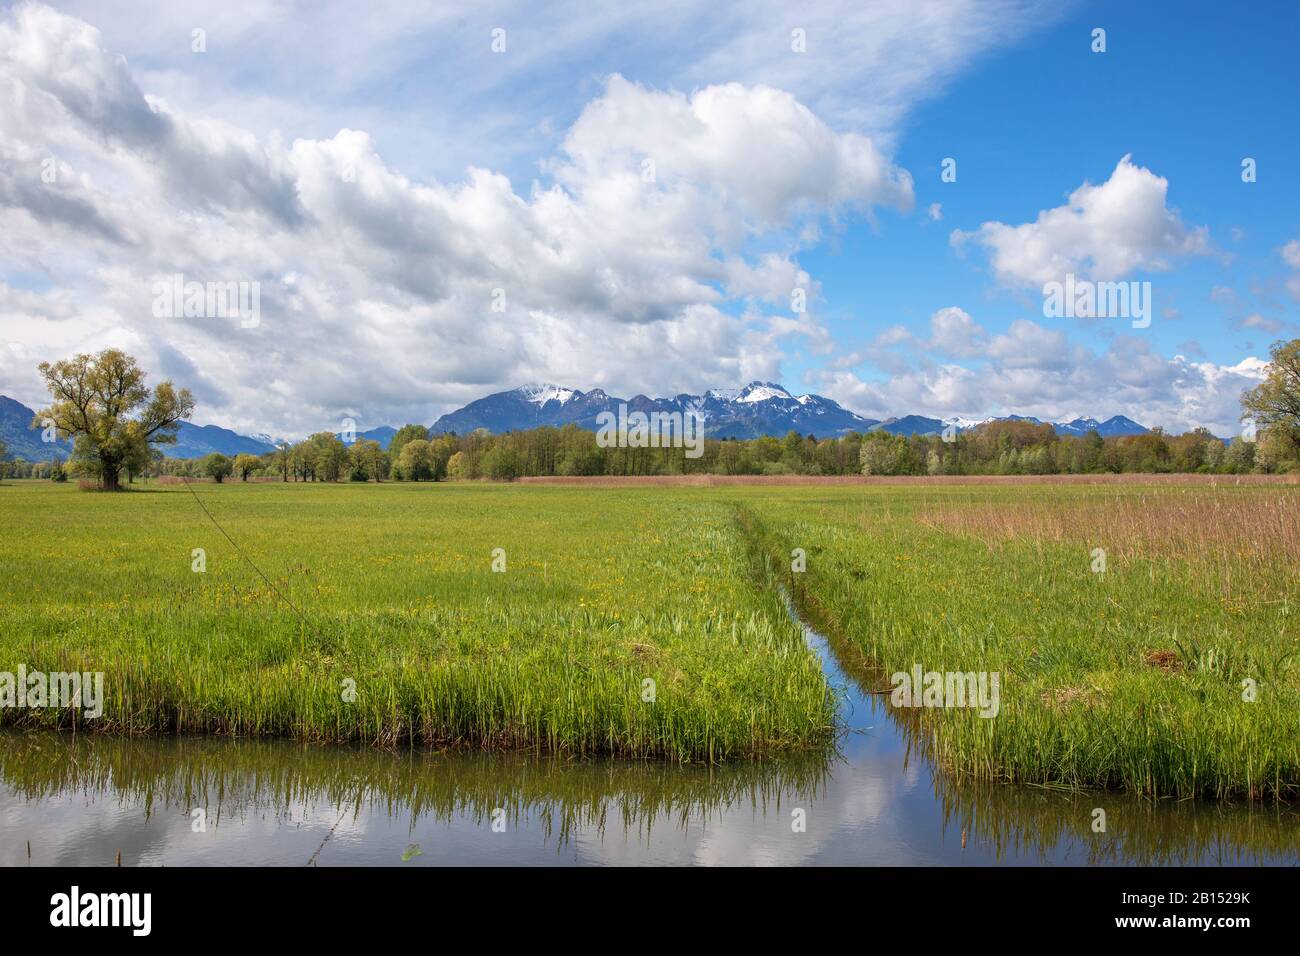 Grabenstaetter Moos, cultivated moor with mountain Kampenwand in background, Germany, Bavaria, Lake Chiemsee Stock Photo